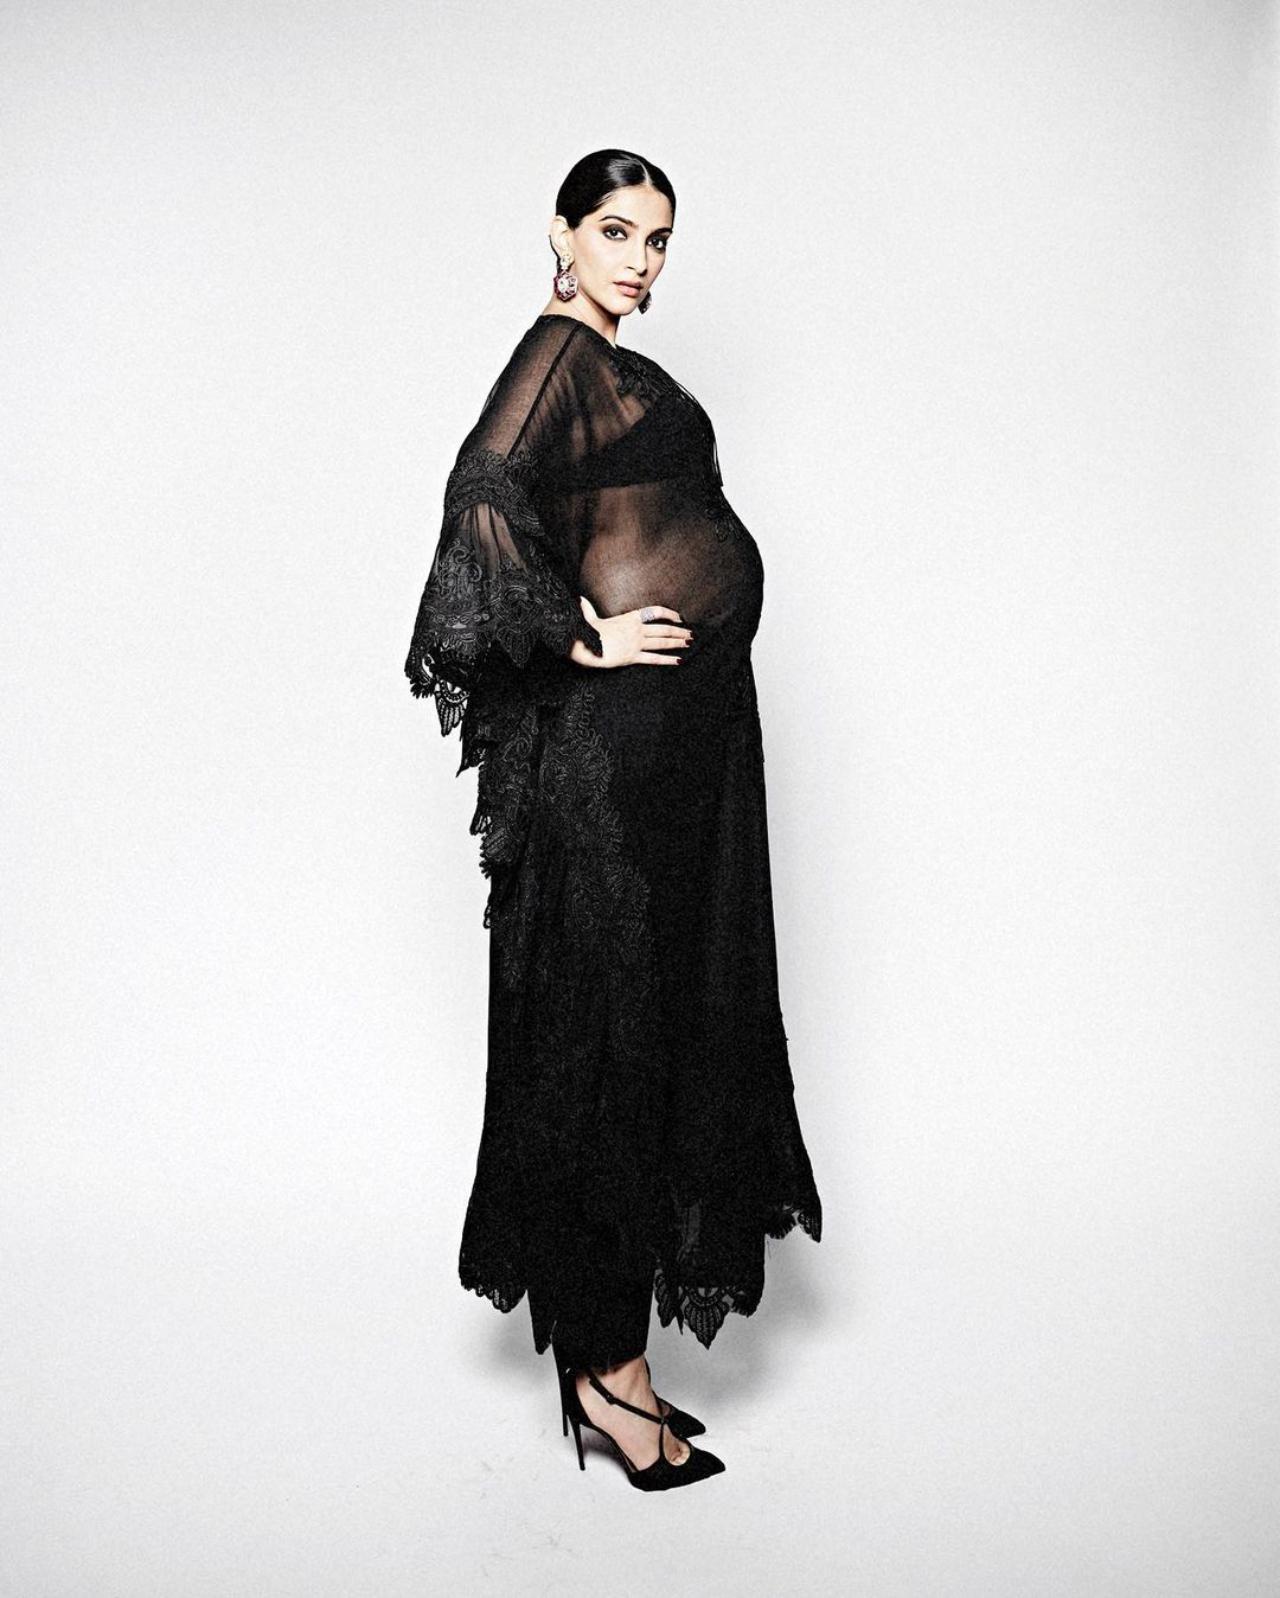 Sonam has been dropping pictures from her maternity shoot and the results are marvellous. From kaftans to silk drapes to casual bright dresses, Sonam has been keeping up with her title of a fashion diva even during her pregnancy